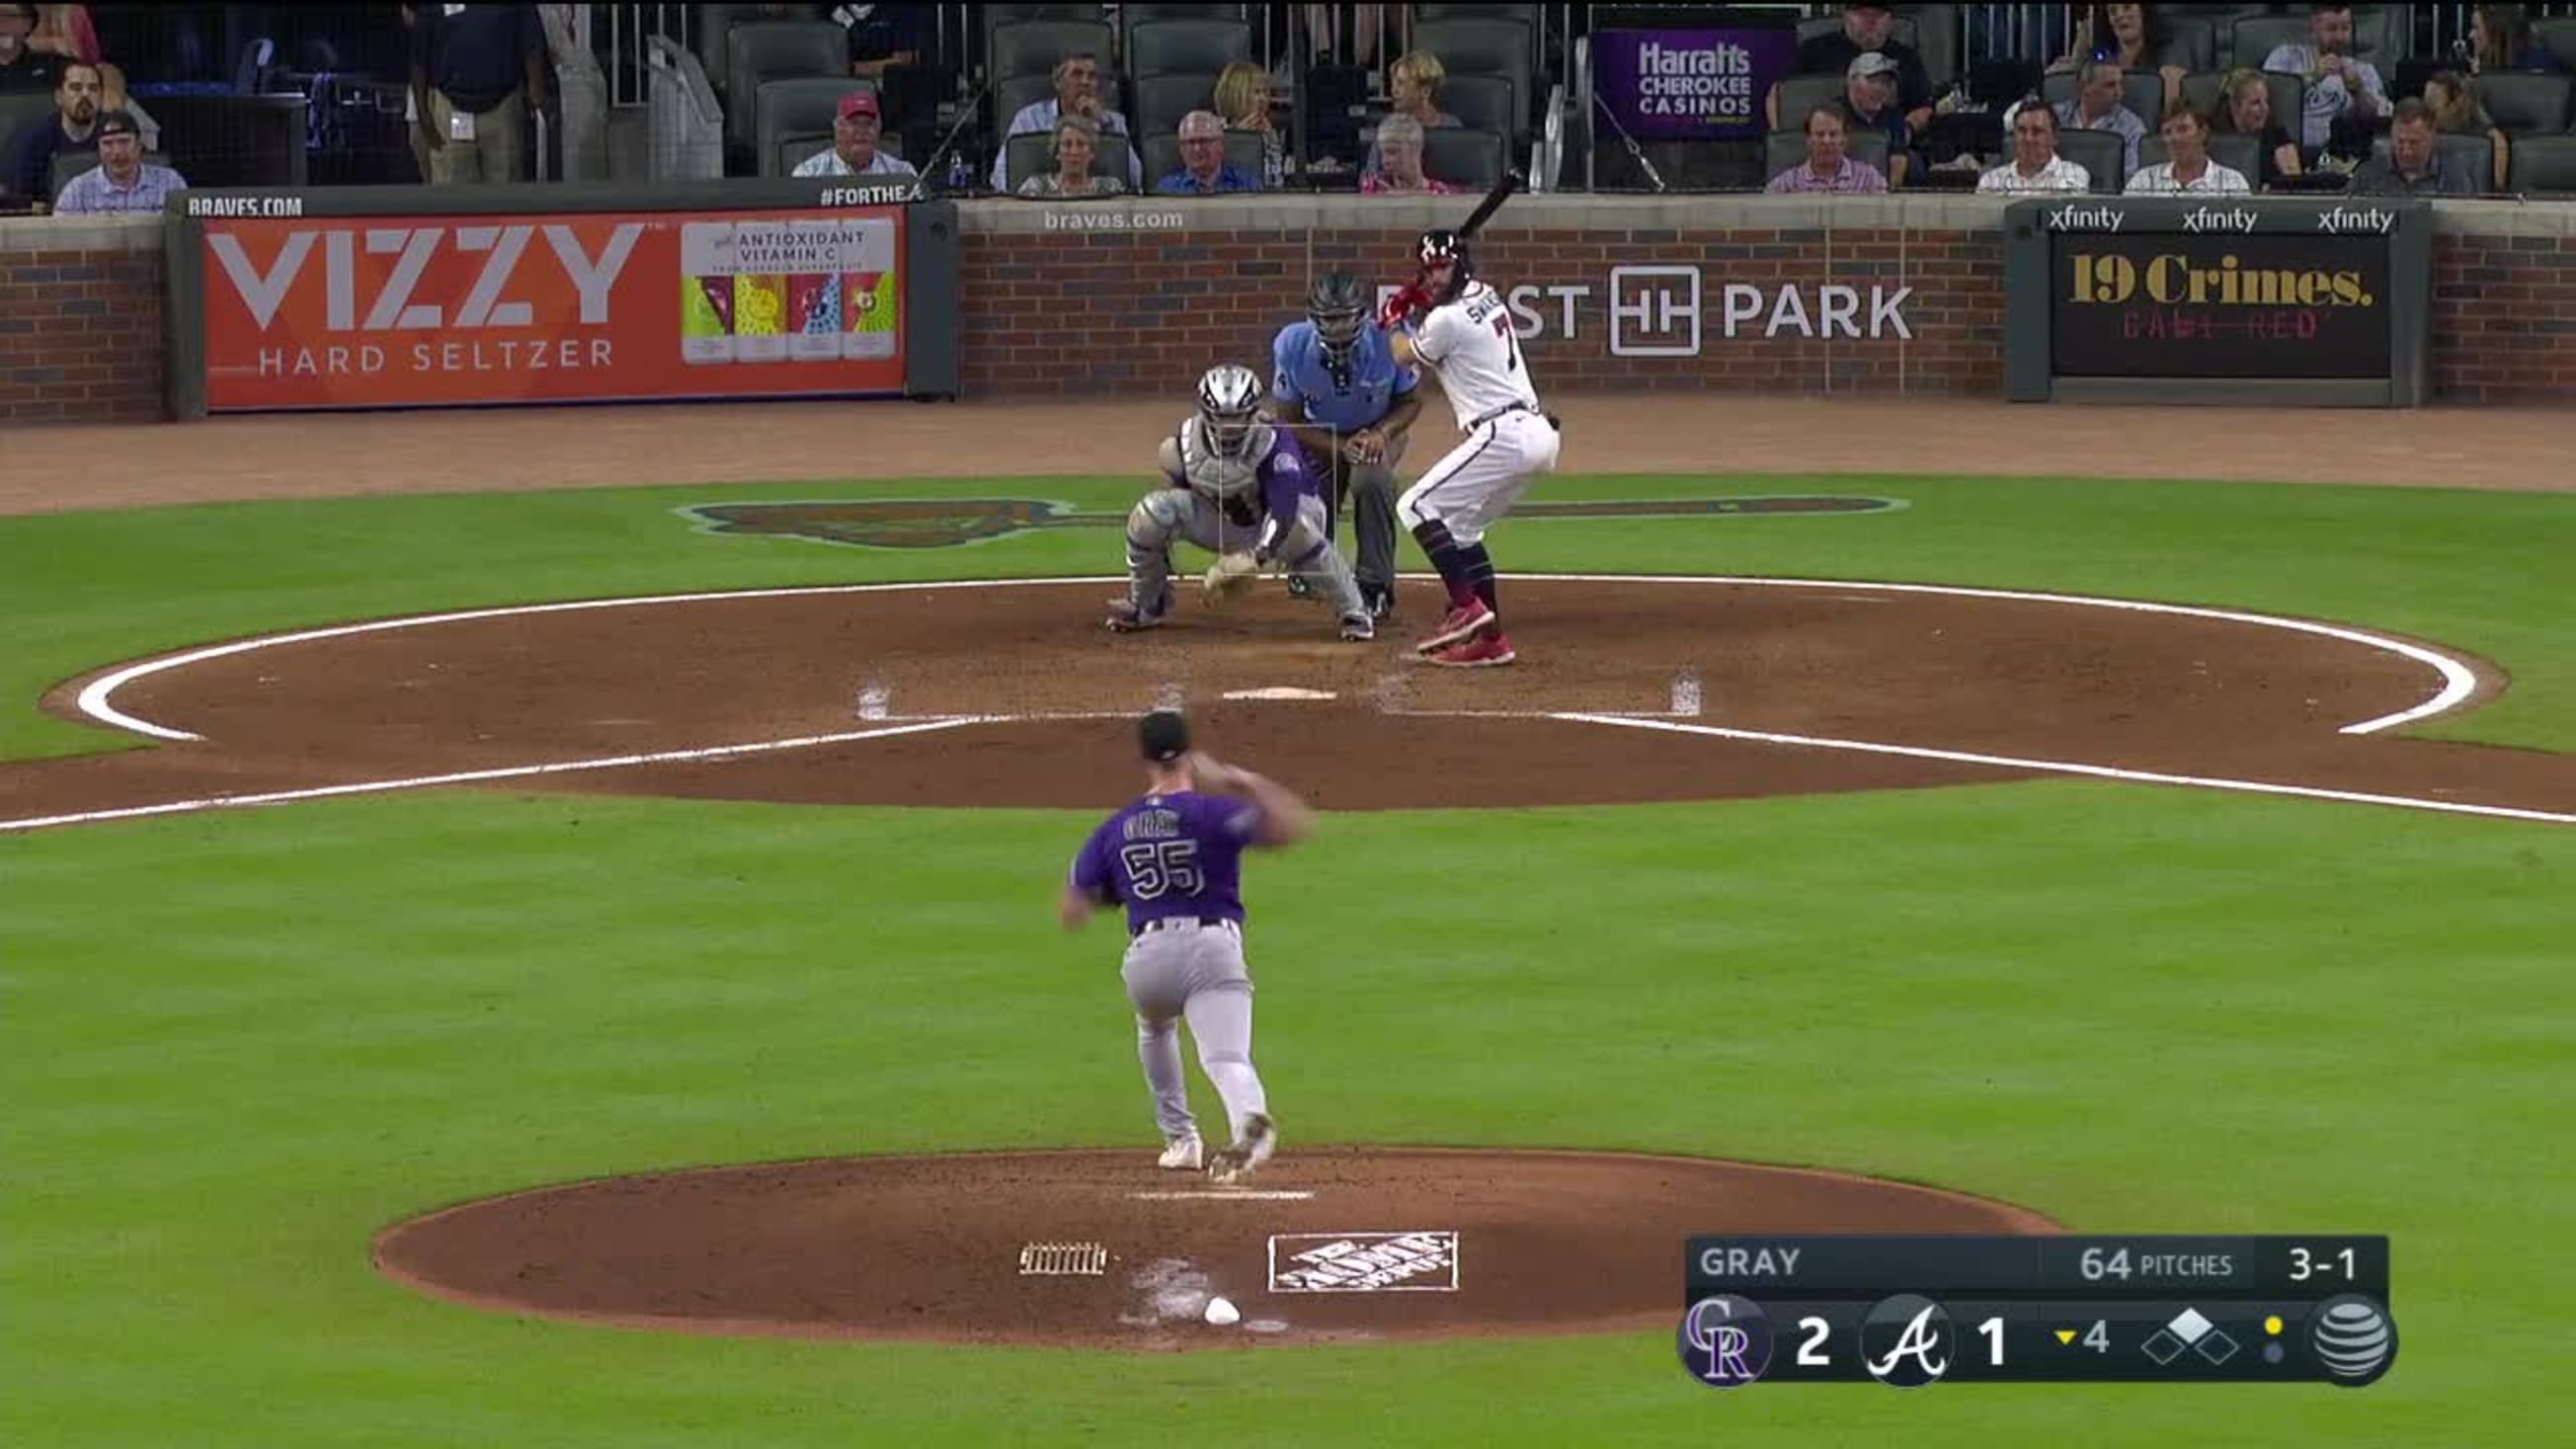 GF Baseball — Dansby Swanson hits a game-tying RBI double in the